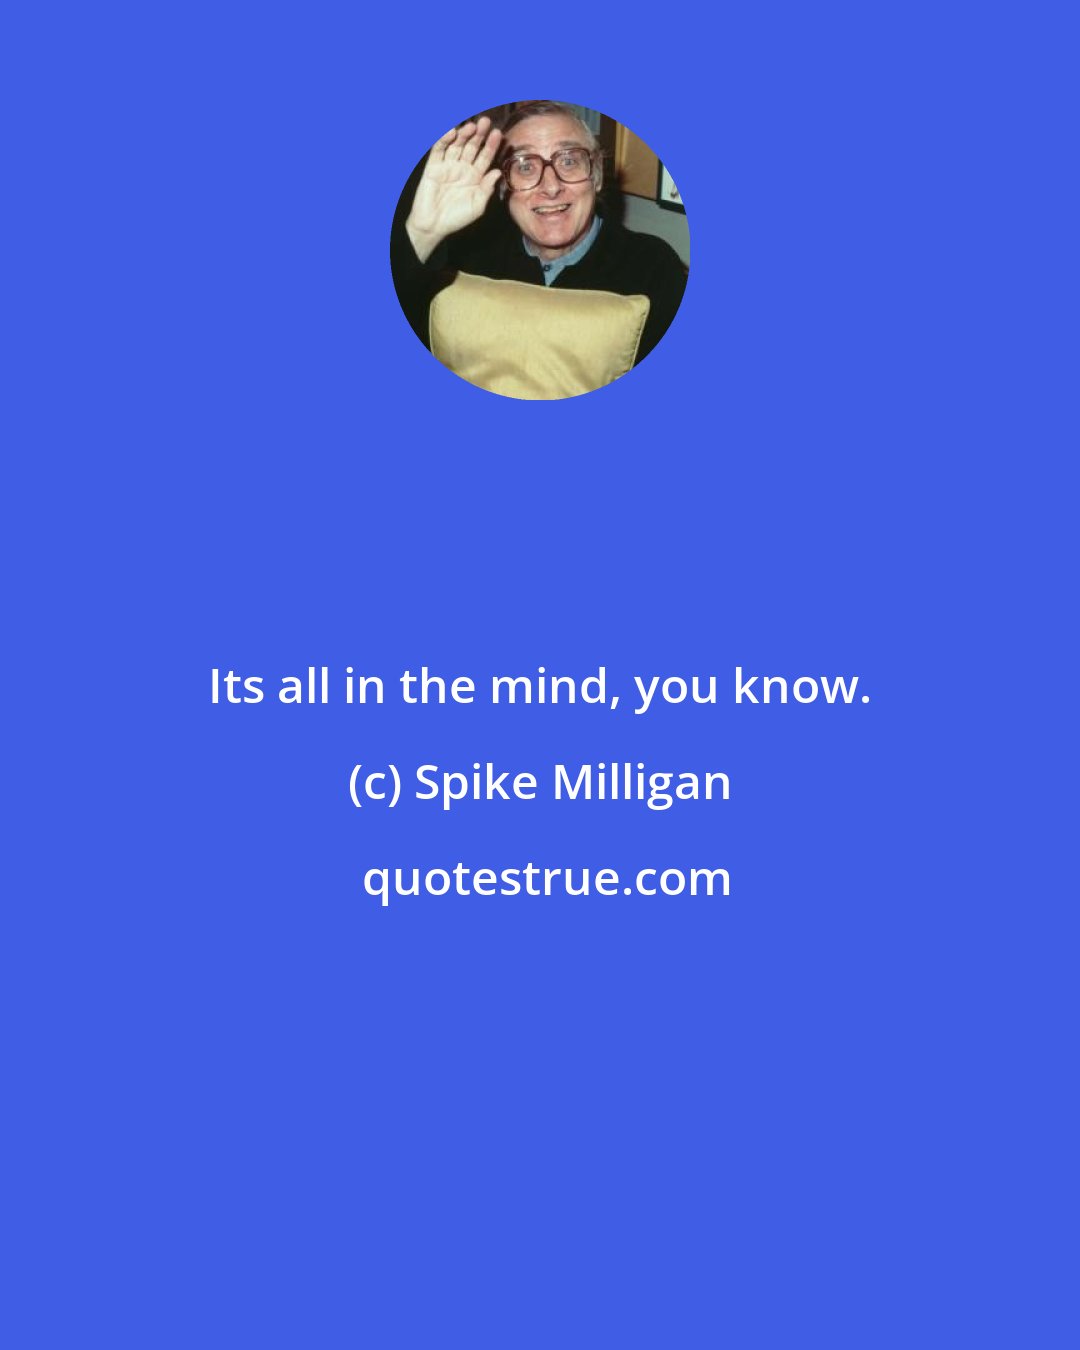 Spike Milligan: Its all in the mind, you know.